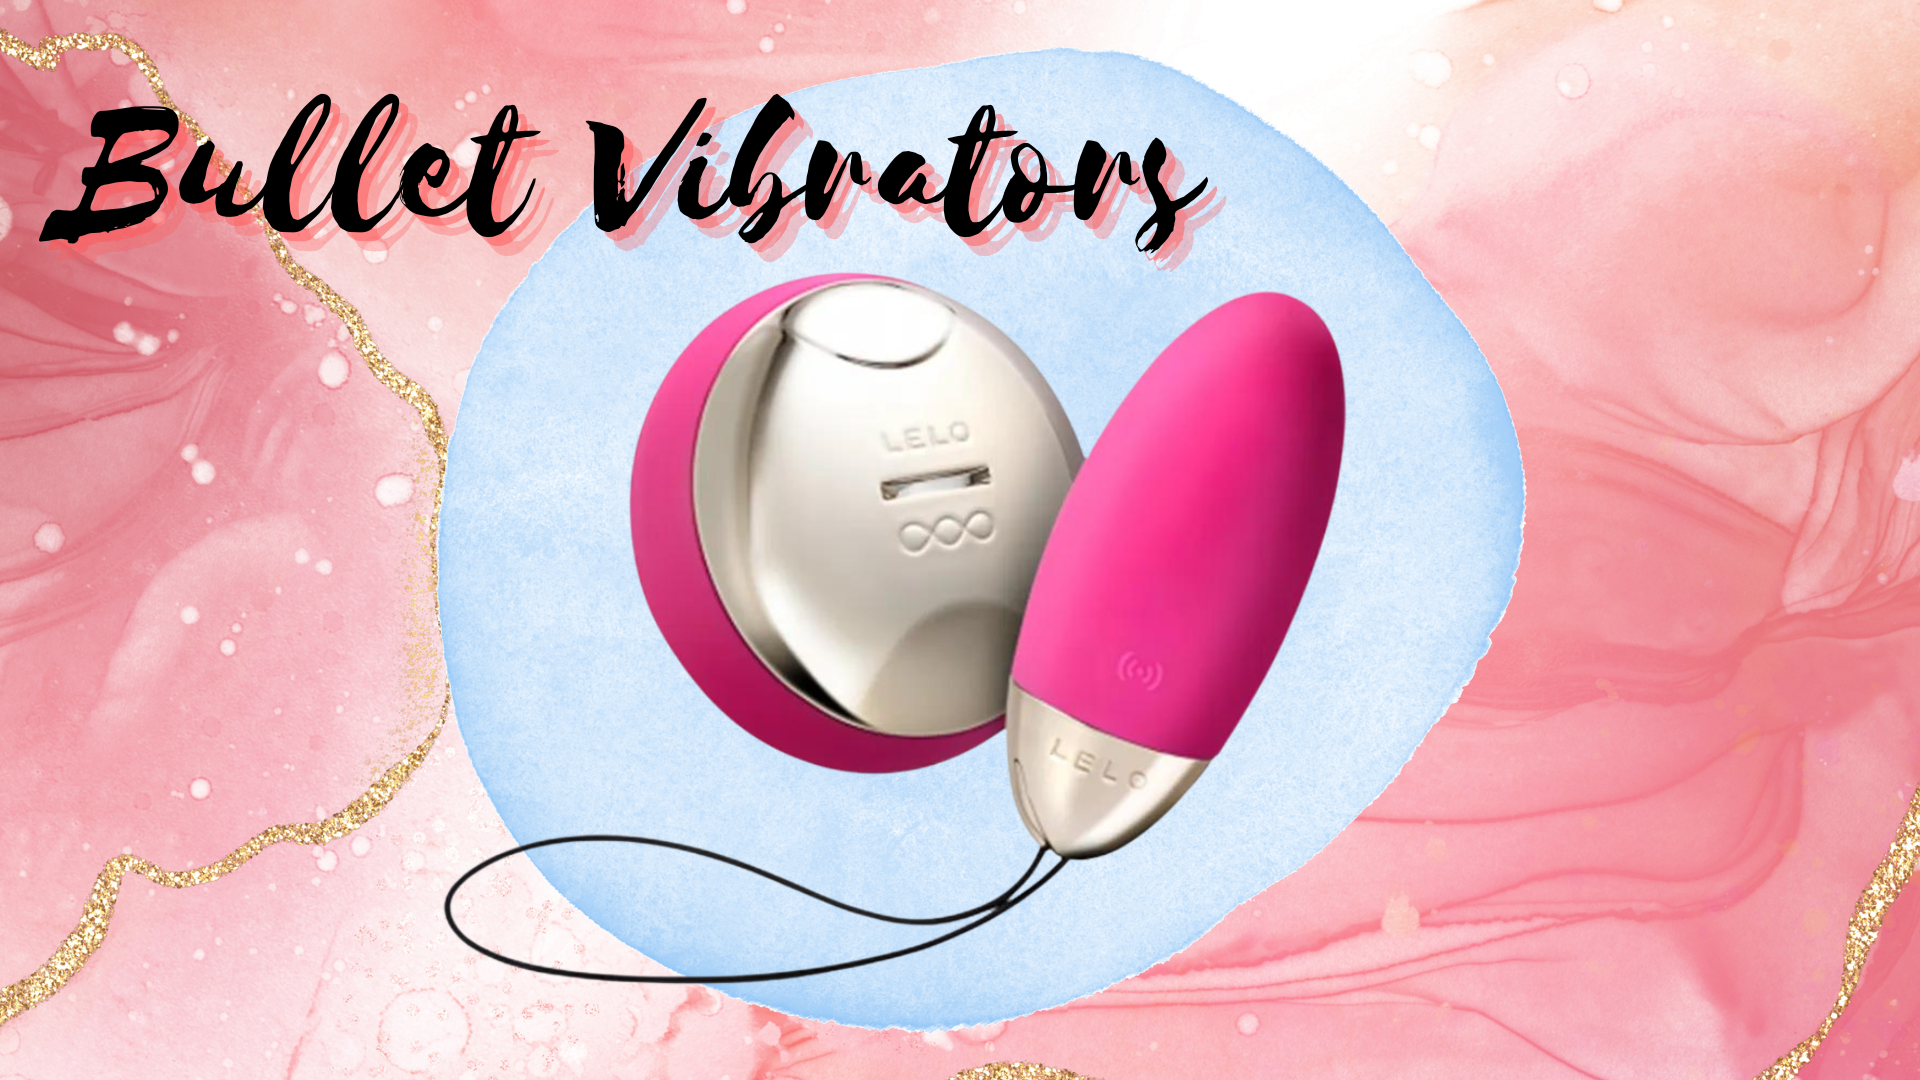 A pink Bullet Vibrator with a remote